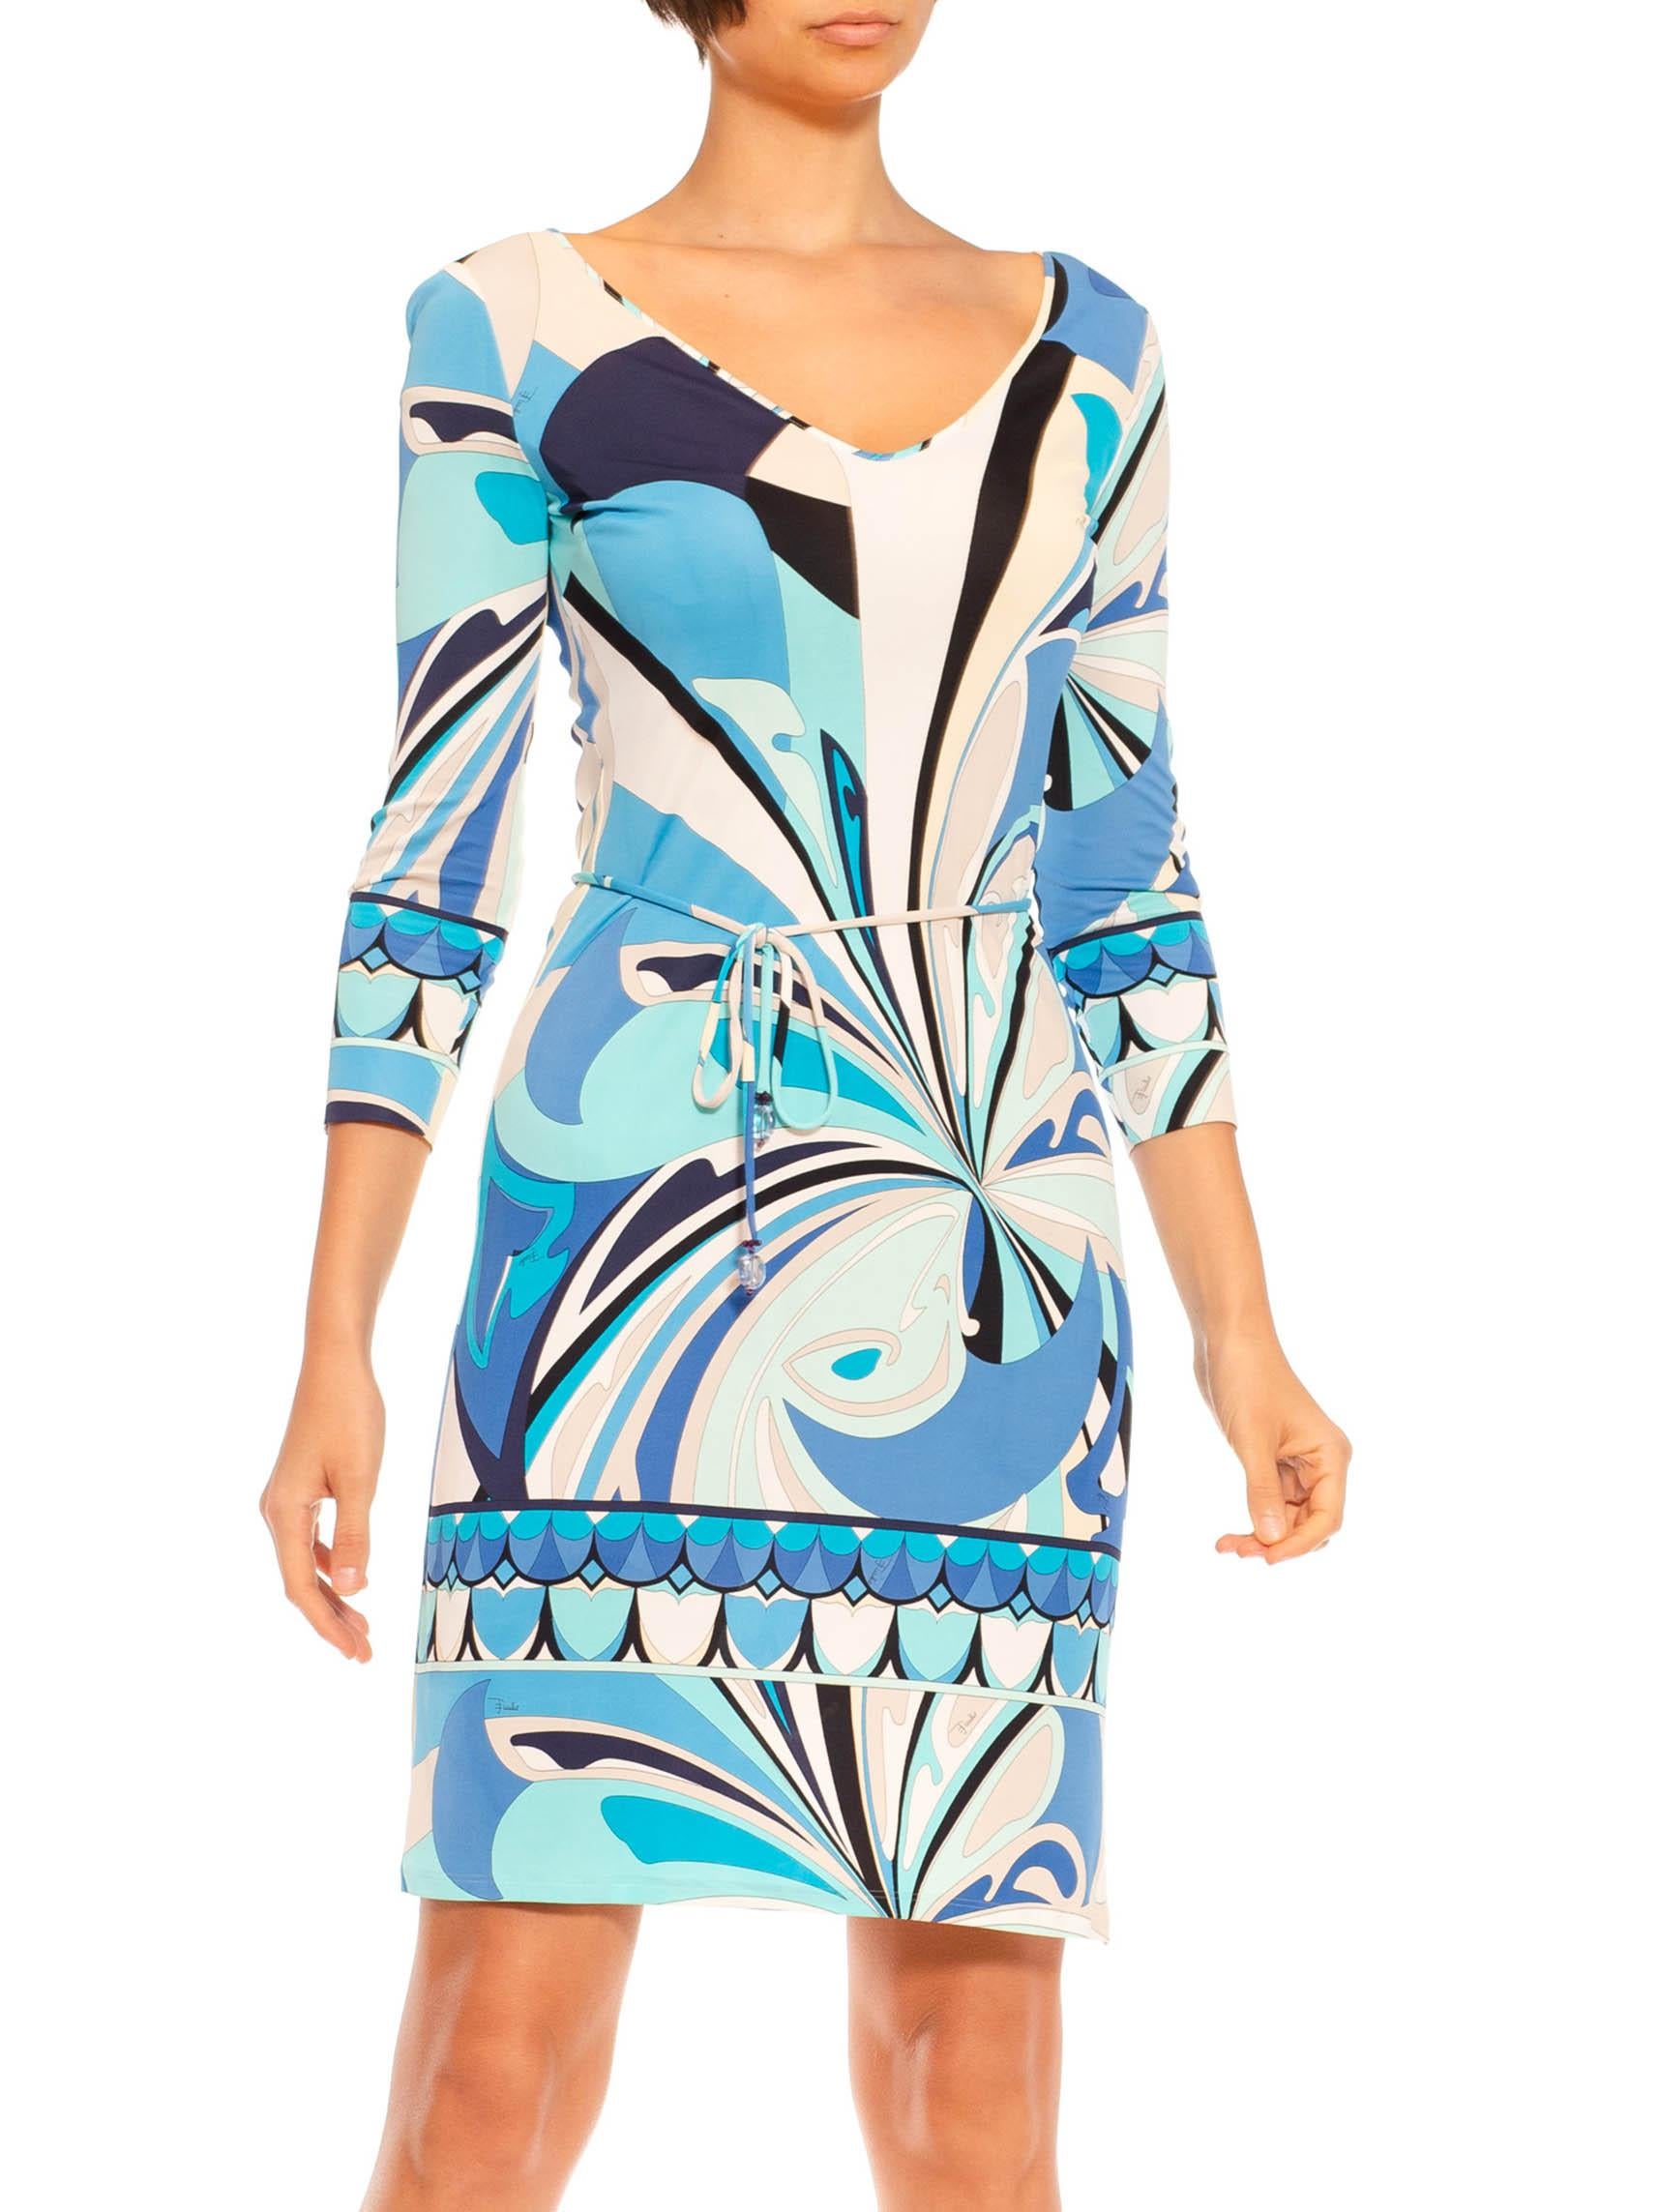 Women's 2000S Emilio Pucci Blue & White Psychedelic Rayon Jersey Long Sleeved Dress